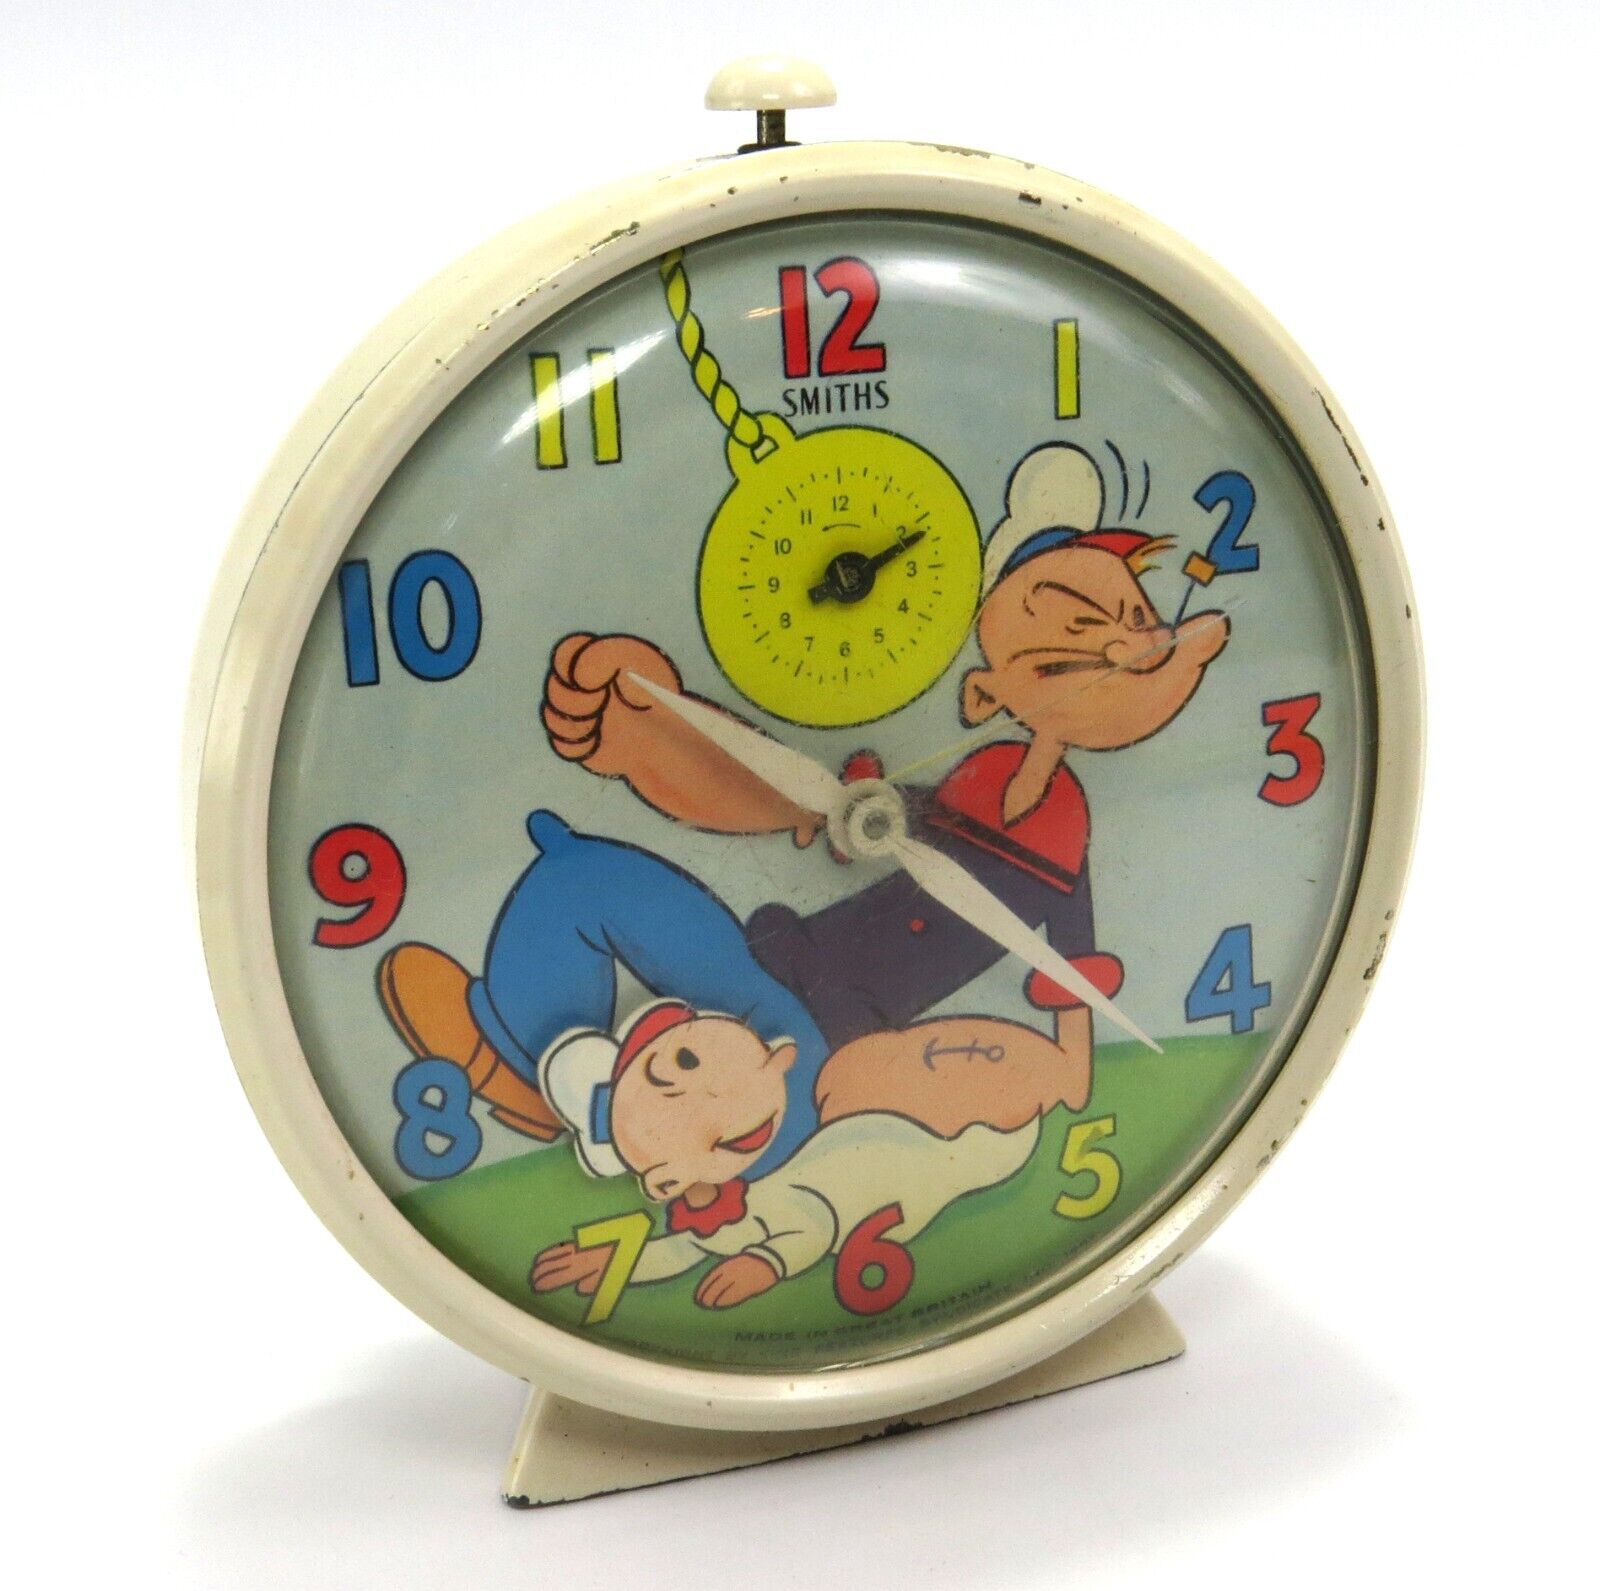 Popeye and Swee'Pea Animated Vintage Smiths Great Britain Alarm Clock - Read